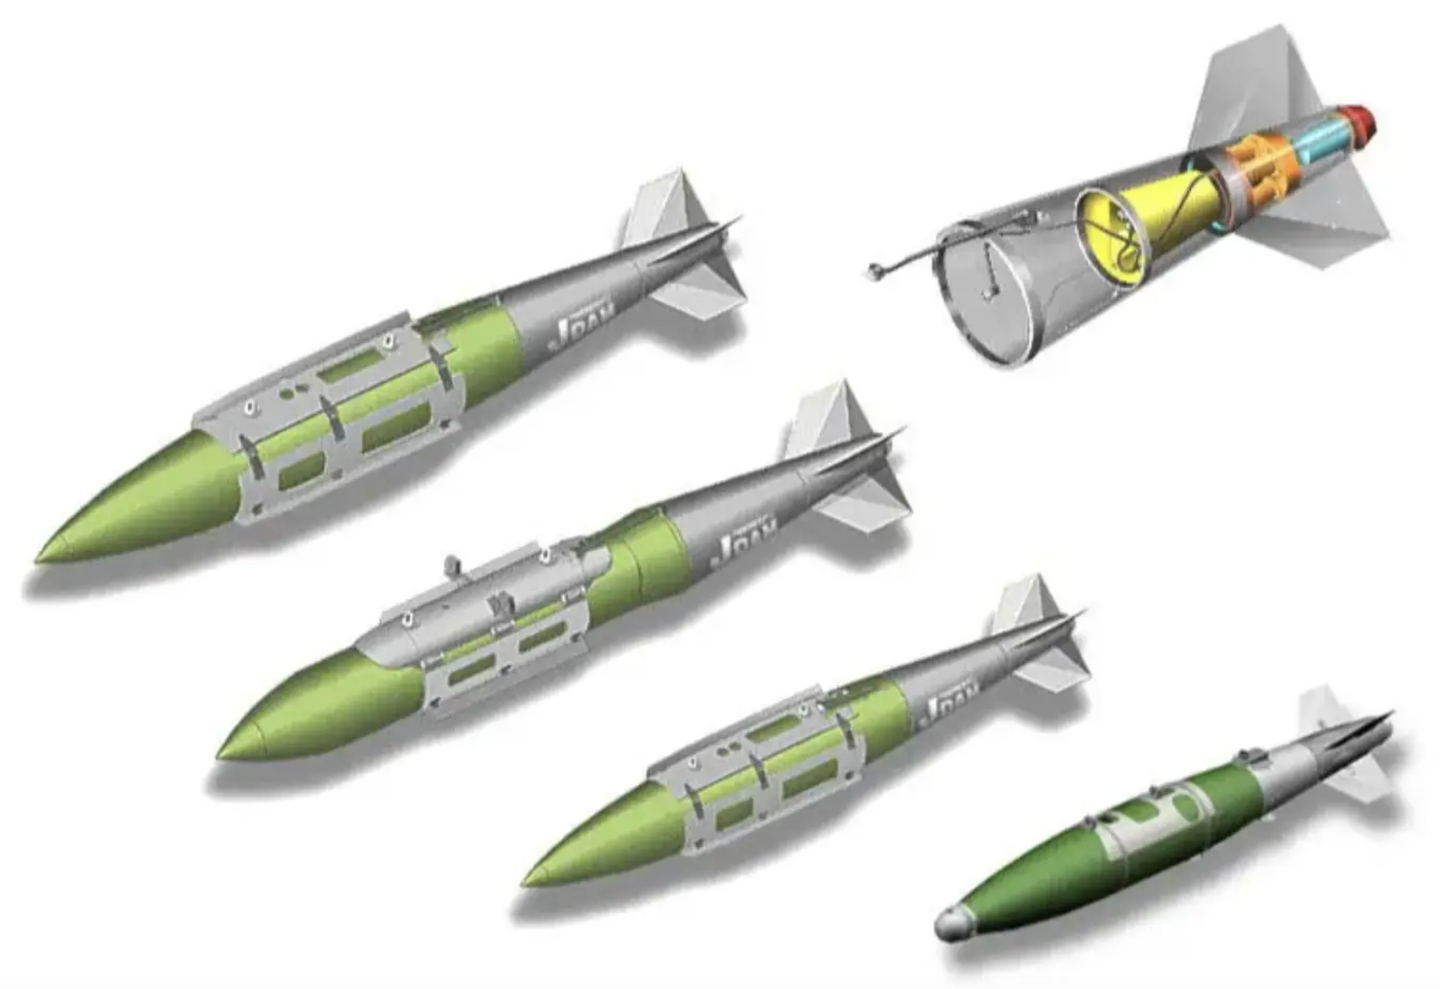 A graphic showing the various tiers of standard JDAM bombs (from left to right, two 2,000-pound-class variants, a 1,000-pound example, and a 500-pound class type), as well as a close-up of one of the tail guidance sections at top right.&nbsp;<em>U.S. Air Force</em>